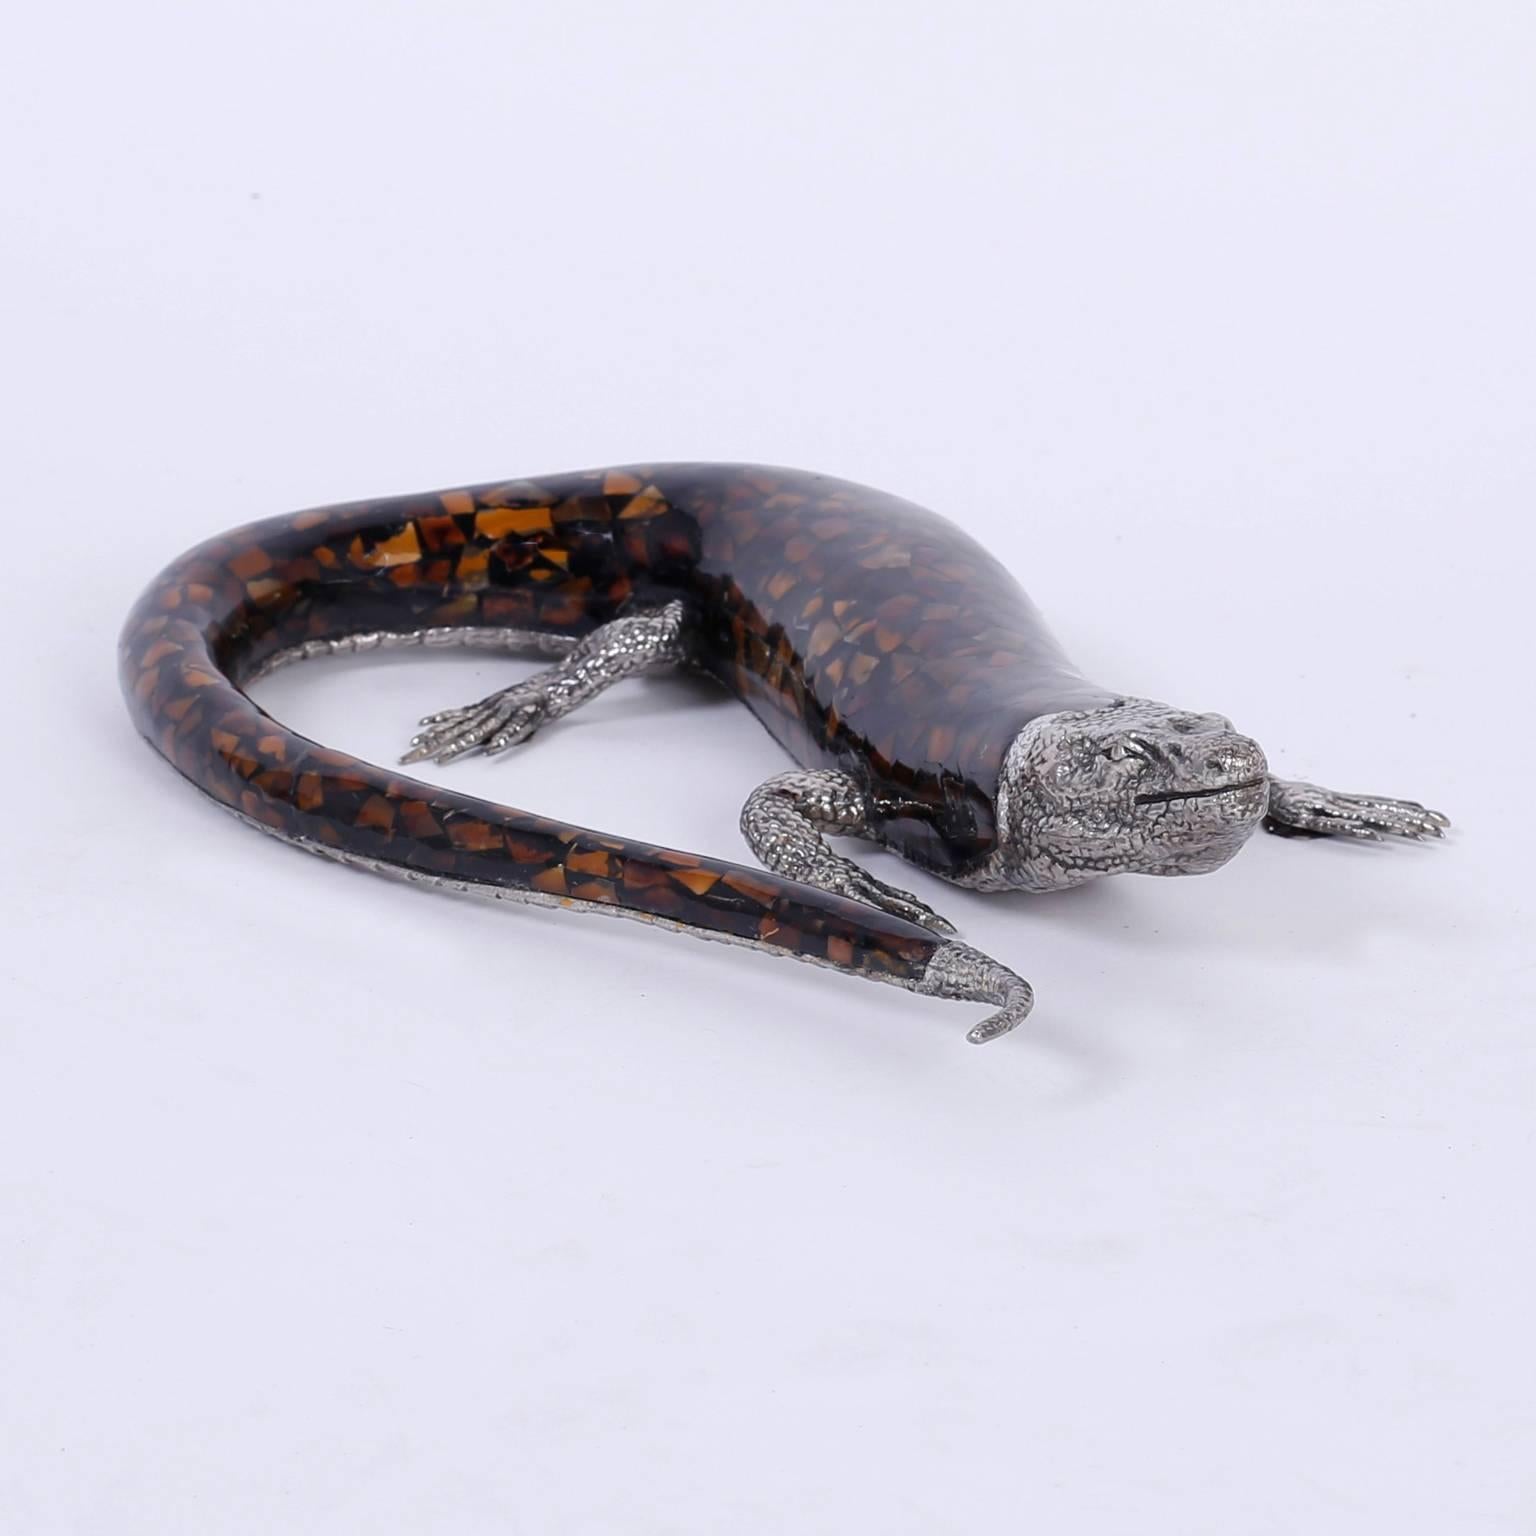 Intriguing midcentury lizard with a lacquered terrazzo body and hand tooled silver metal head, feet, tail tip, and bottom. Signed Maitland-Smith on a gold tag.